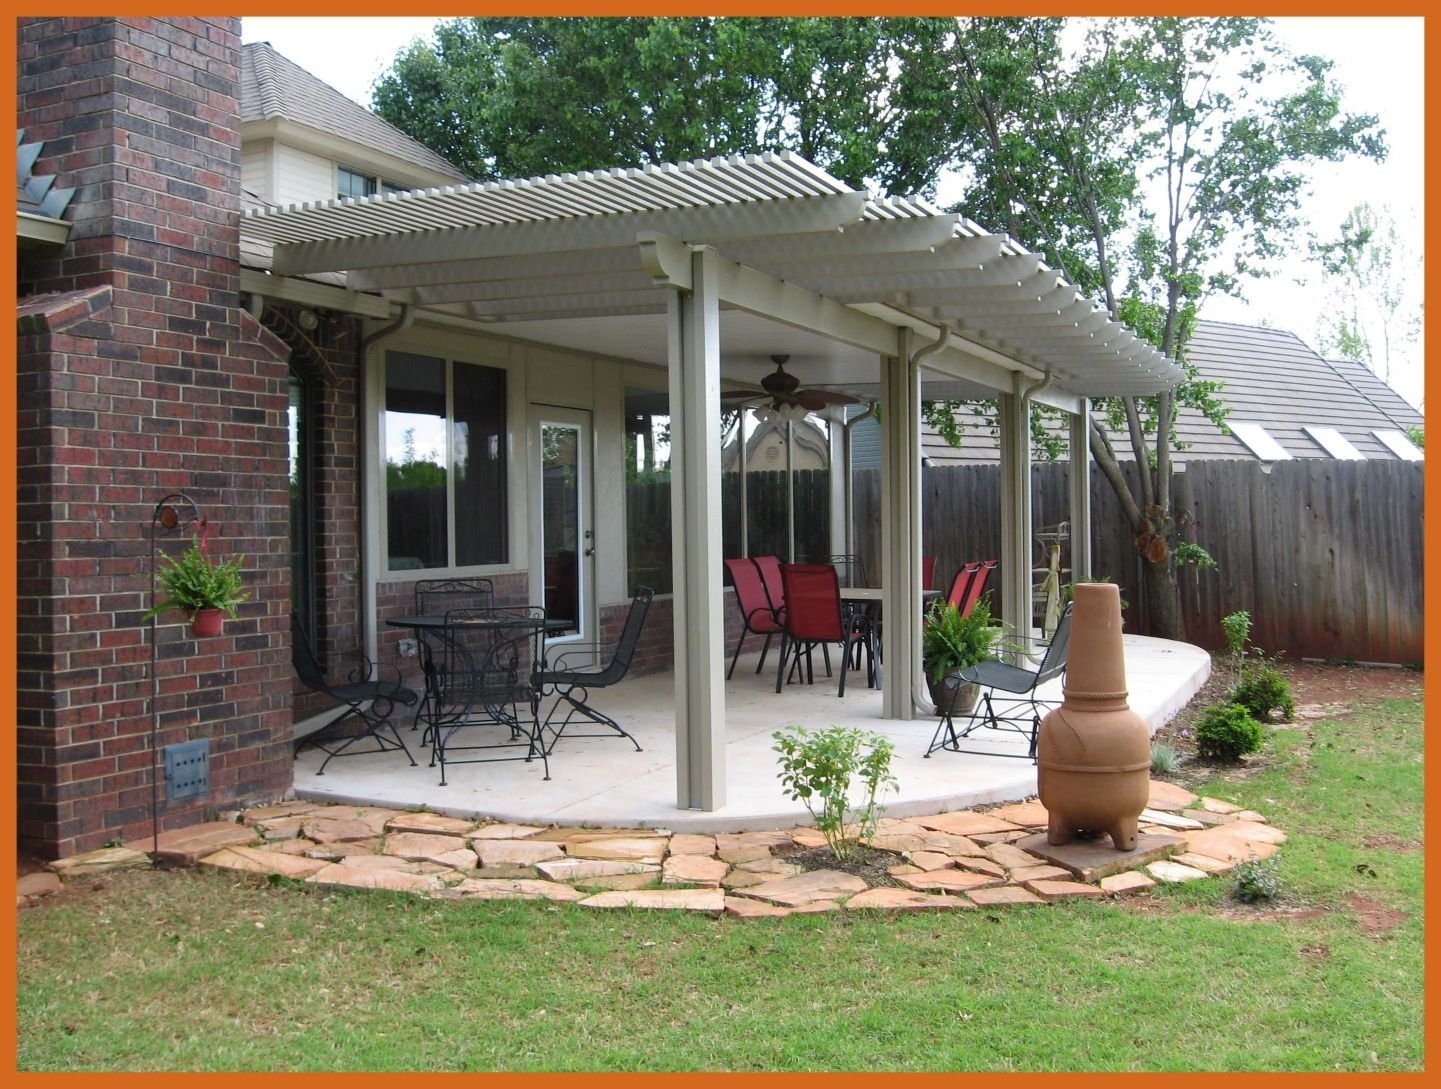 10 Fashionable Covered Patio Ideas For Backyard amazing furniture backyard covered patio ideas designs to renew 2022